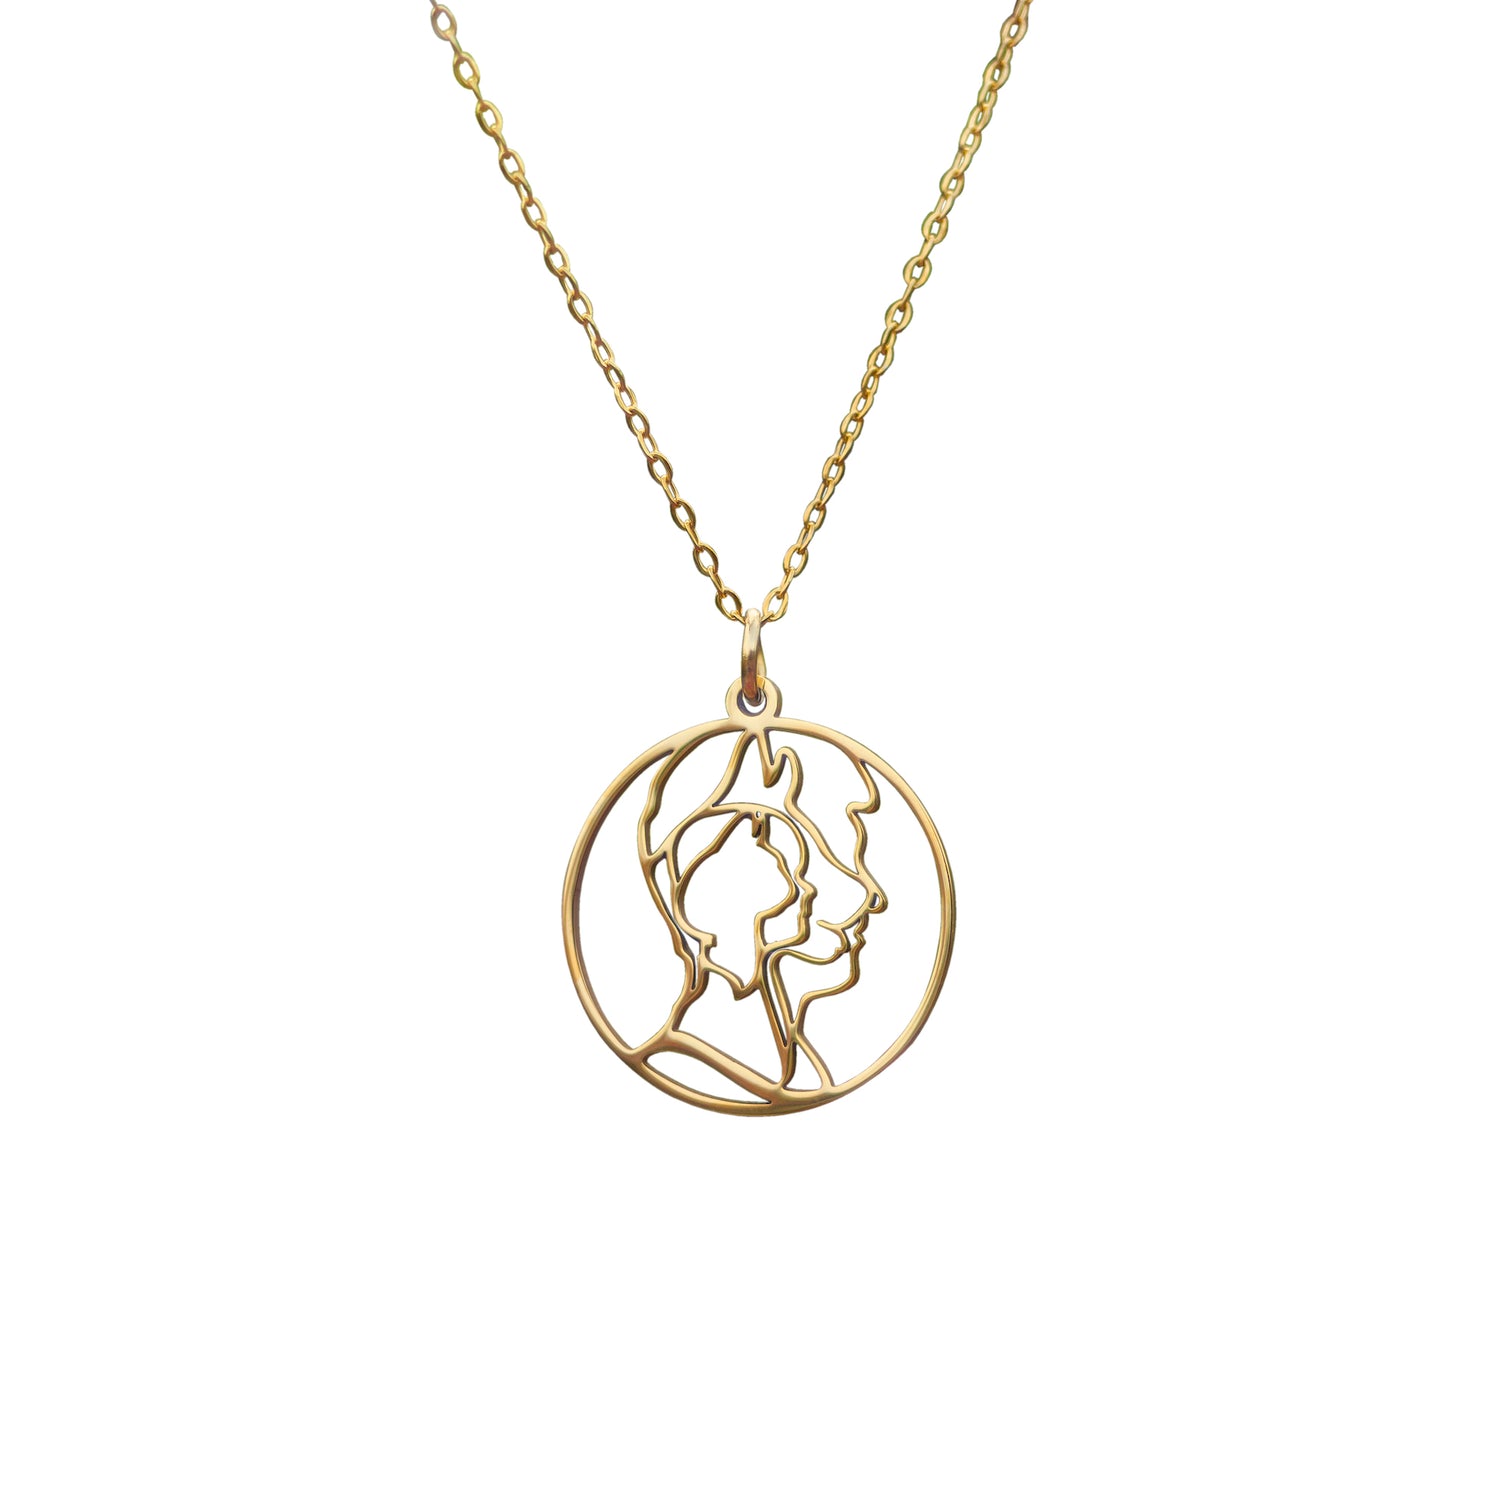 Artemis Necklace with white background - Isolana.Co